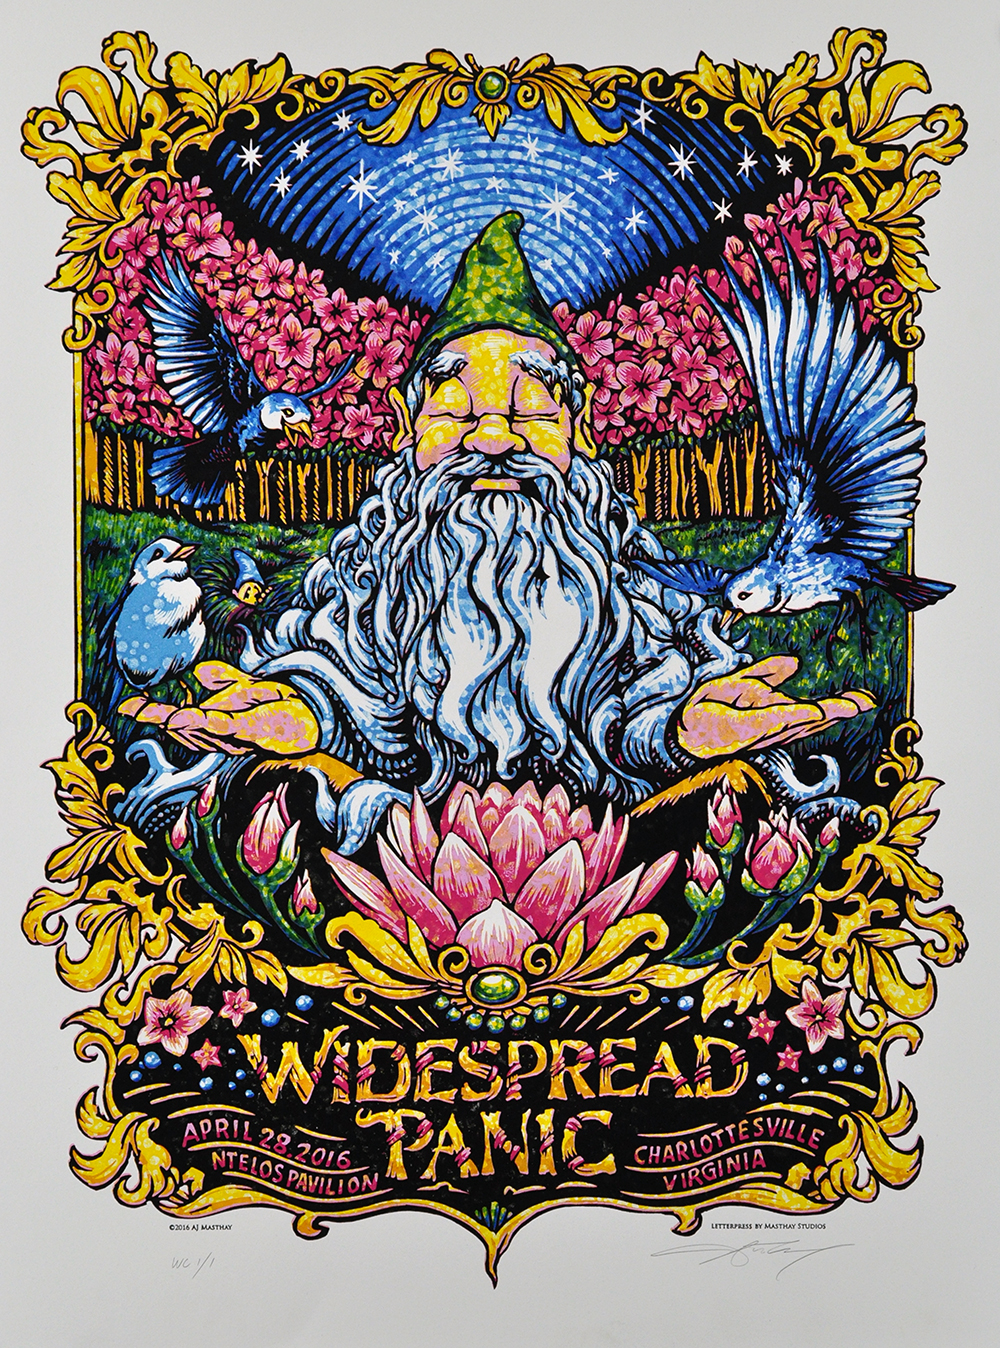 Inside The Rock Poster Frame Blog Aj Masthays Widespread Panic